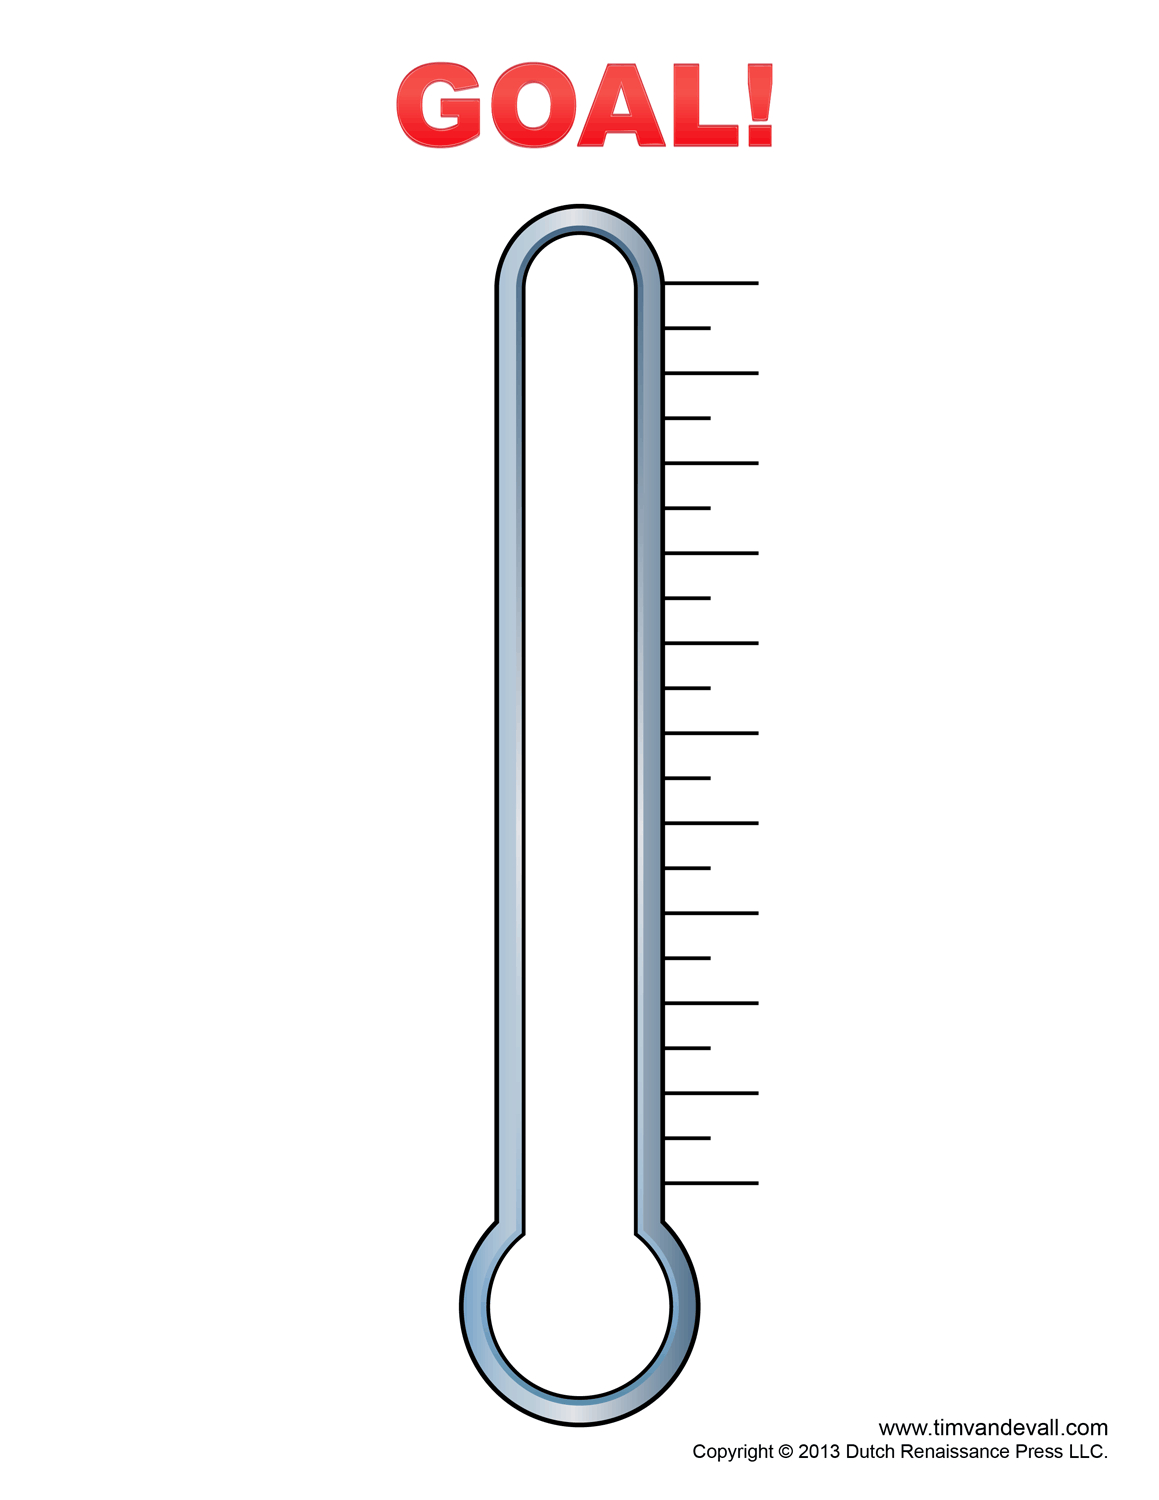 Fundraising Thermometer Template | For J | Pinterest | Goal - Free Printable Goal Thermometer Template